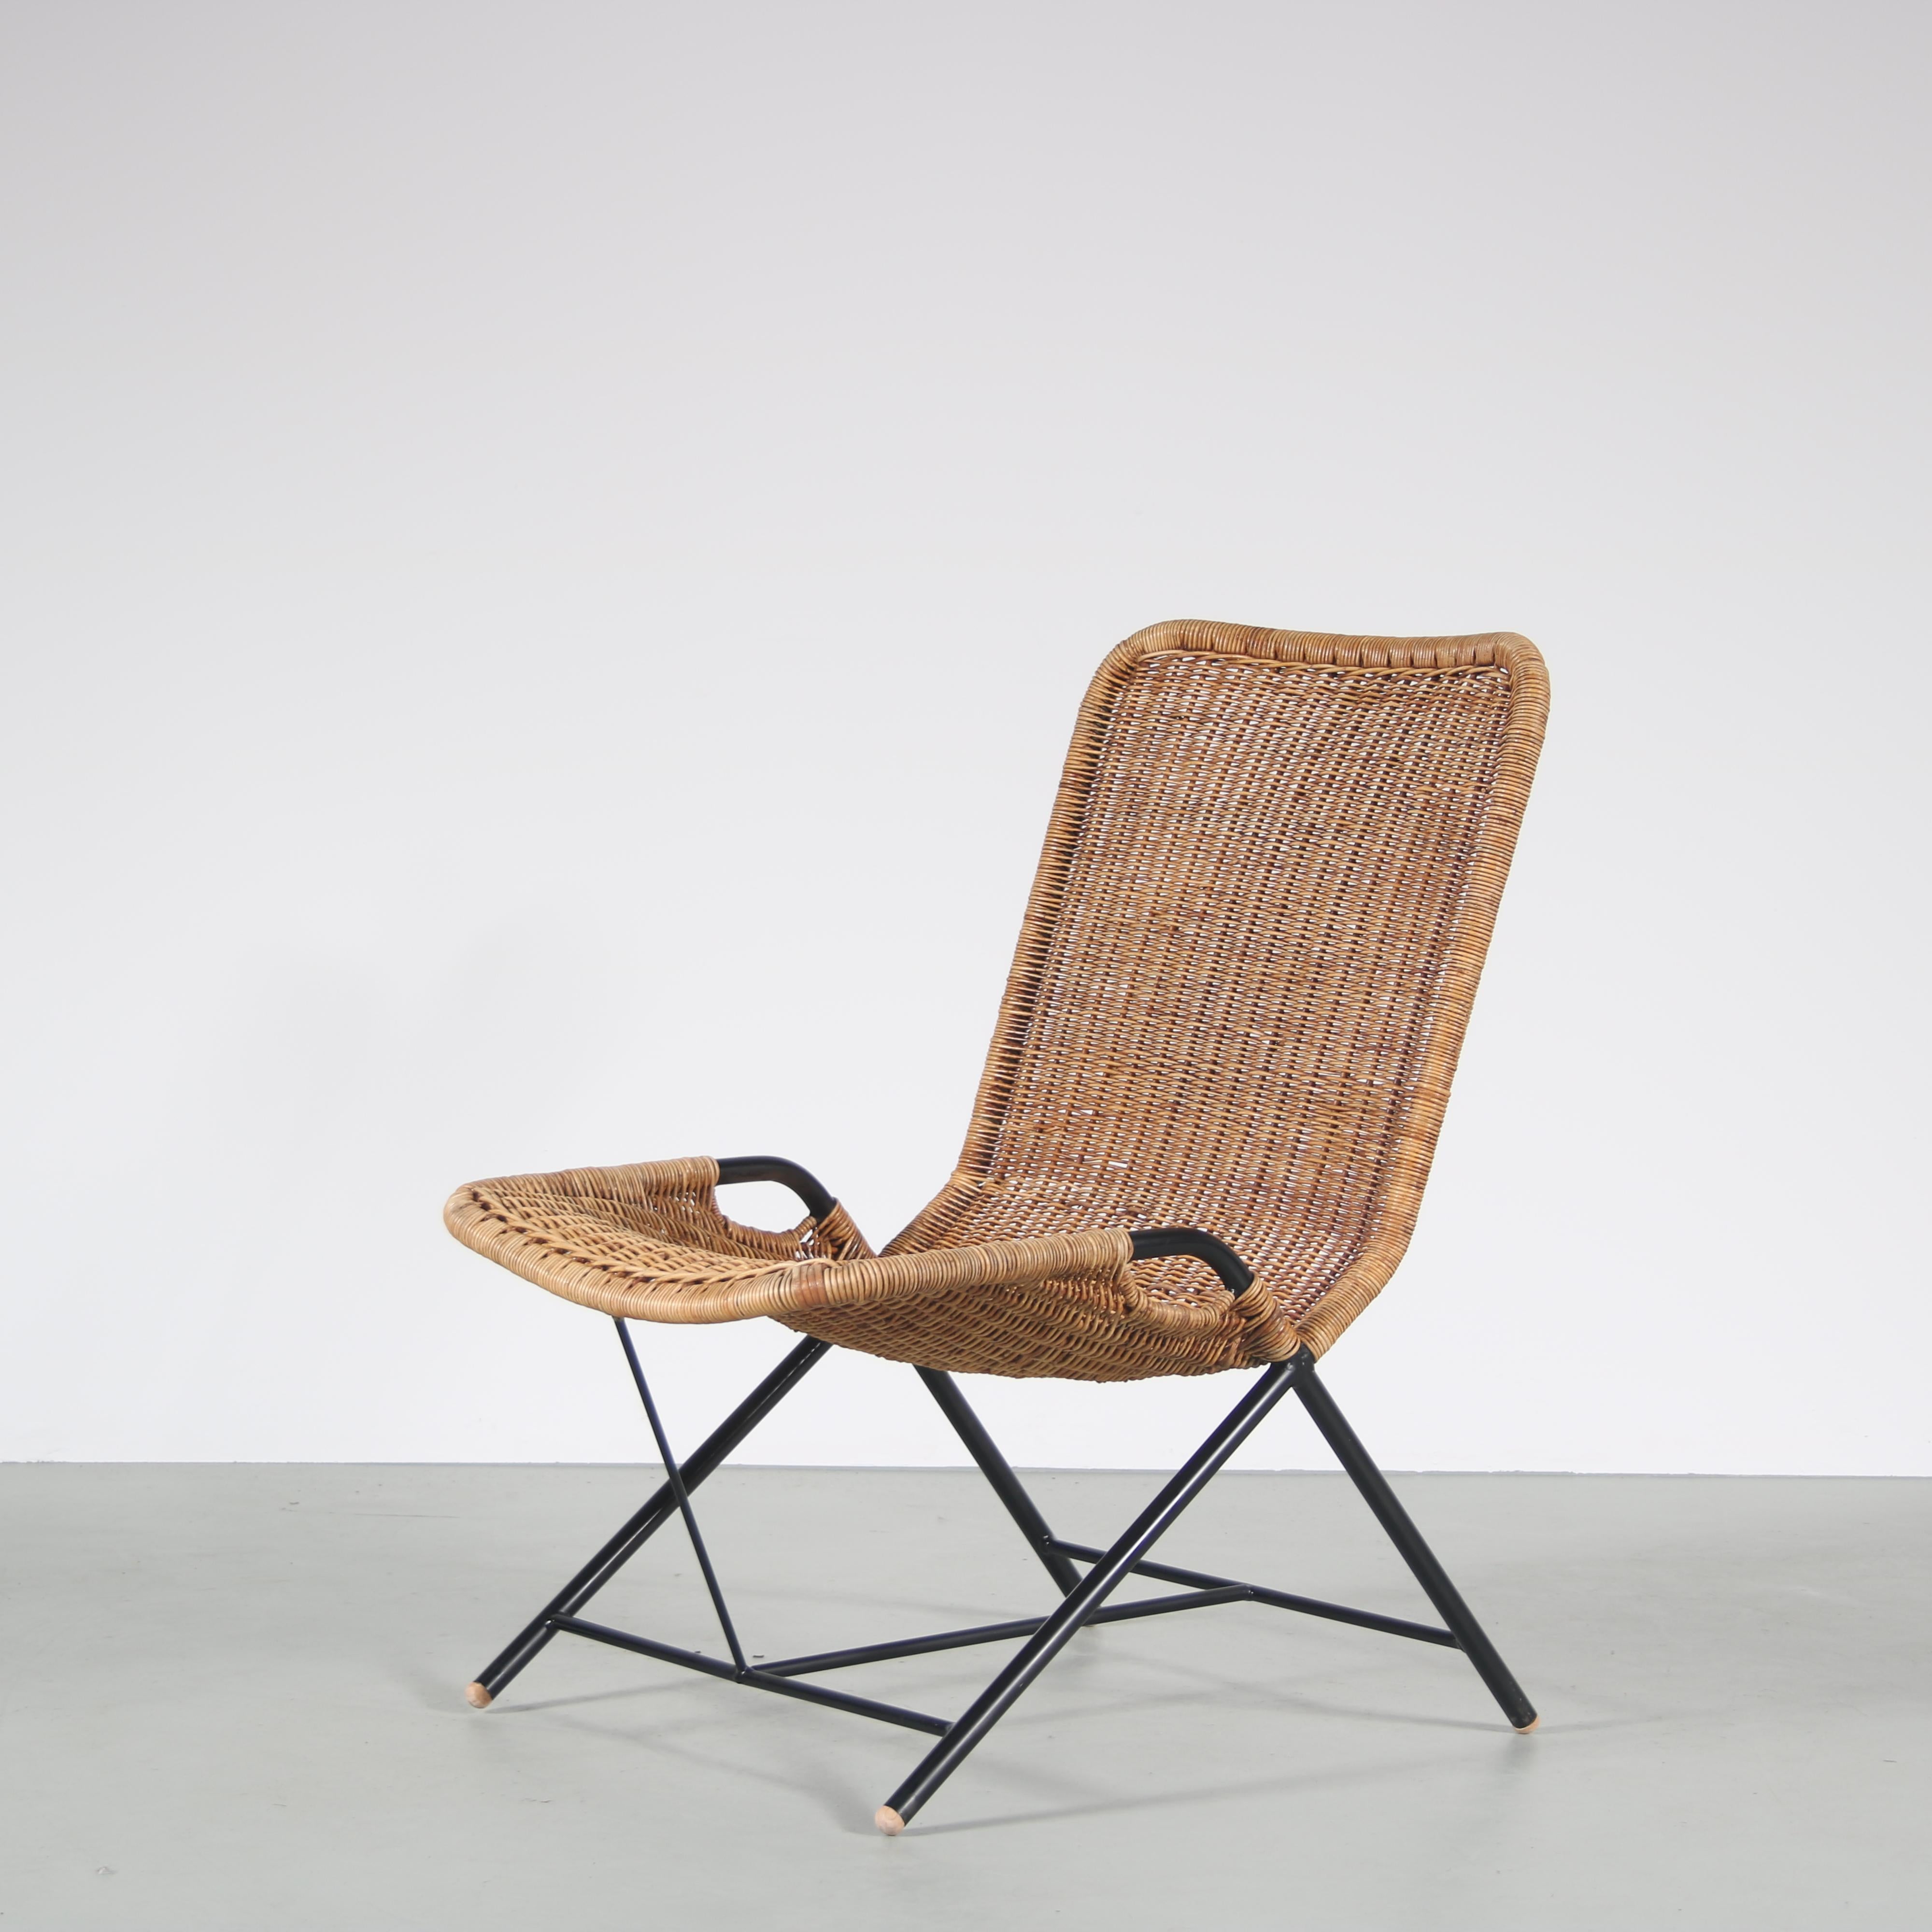 A beautiful dining chair by Dutch designer Dirk van Sliedregt in highly recognizable style. Manufactured in the Netherlands around 1950.

The chair, model 587, has a tubular black lacquered metal base with wicker upholstery. The clean black metal